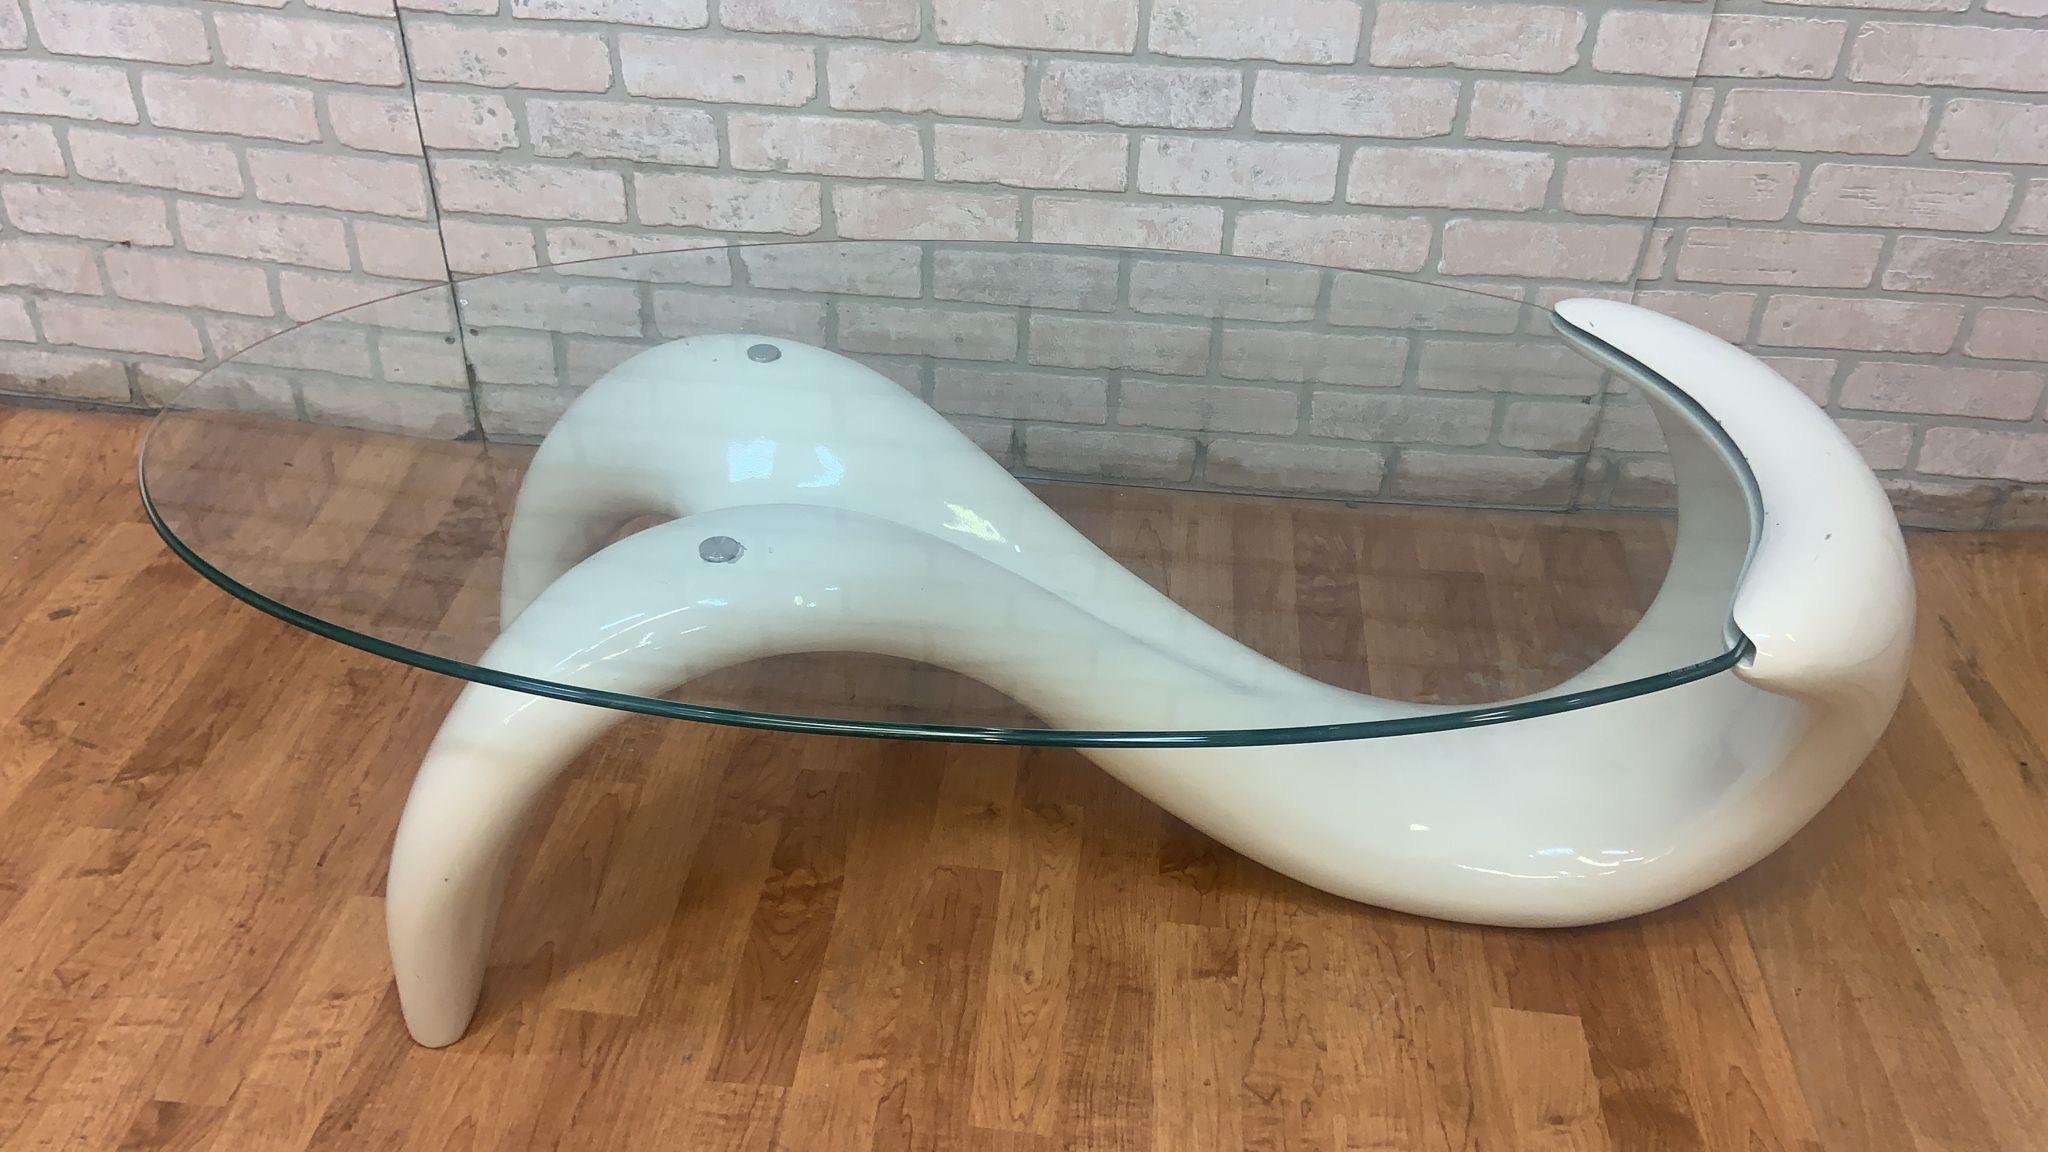 Mid Century Modern White Abstract Fiberglass Sculptural Base Oval Glass Top Coffee Table

This mid century modern abstract white table is going to be a speaking point in any room that it is featured in. The base is constructed of fiberglass and the